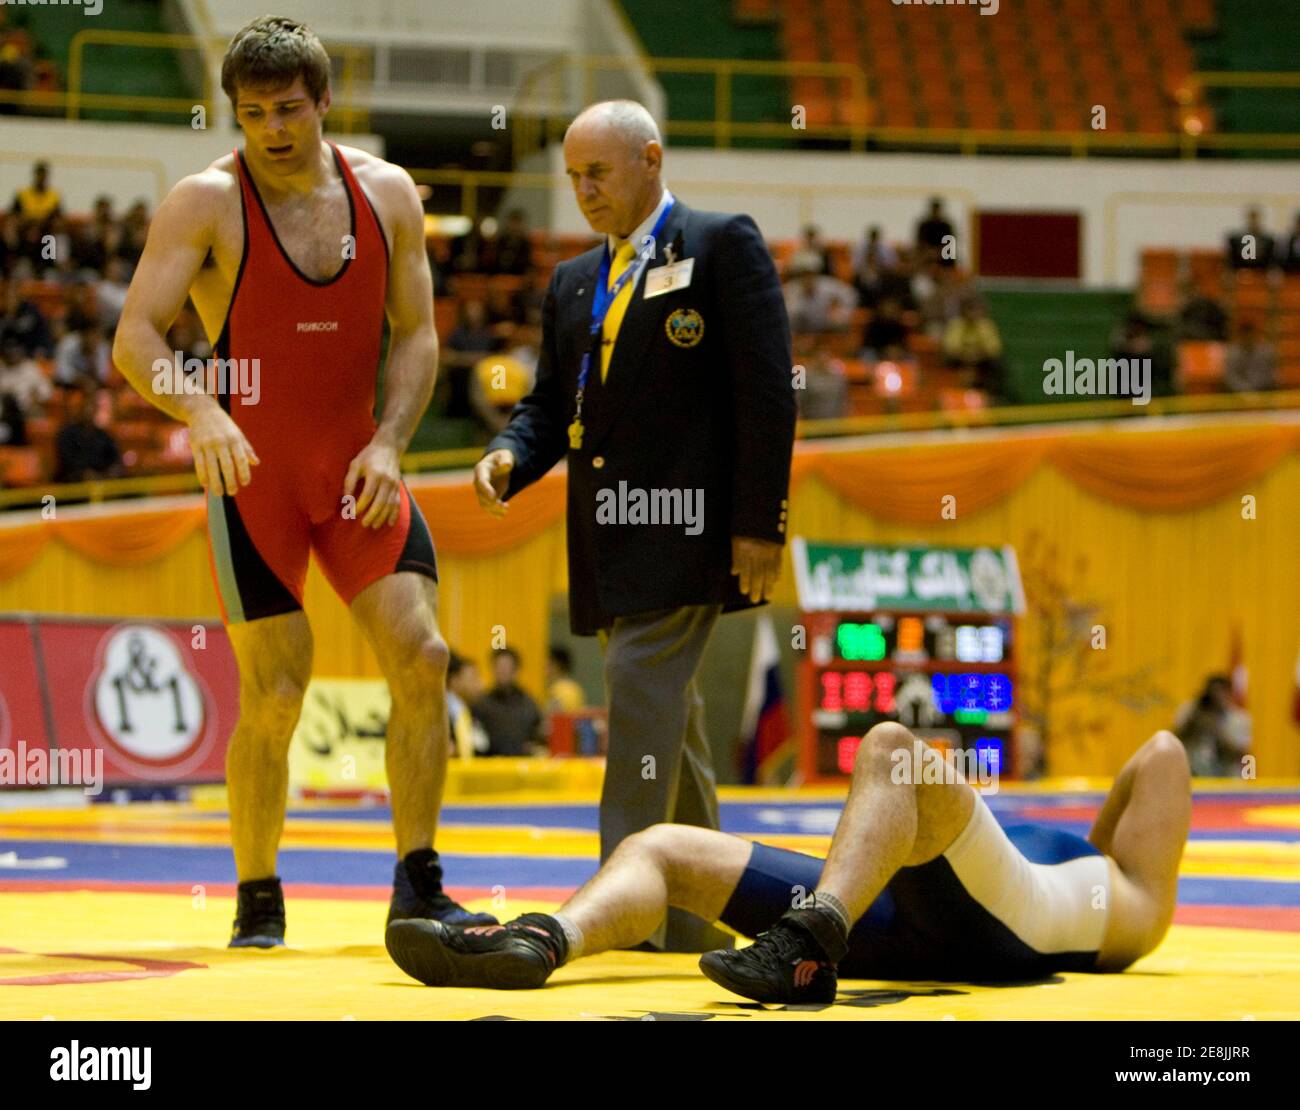 Michal Tamillow of the U.S. (in red) wins over Houman Sheida on their match in the 96kg weight class of the 29th Takhti Free Style Wrestling Tournament in Tehran March 12, 2009. REUTERS/Raheb Homavandi (IRAN SPORT WRESTLING POLITICS) Stock Photo